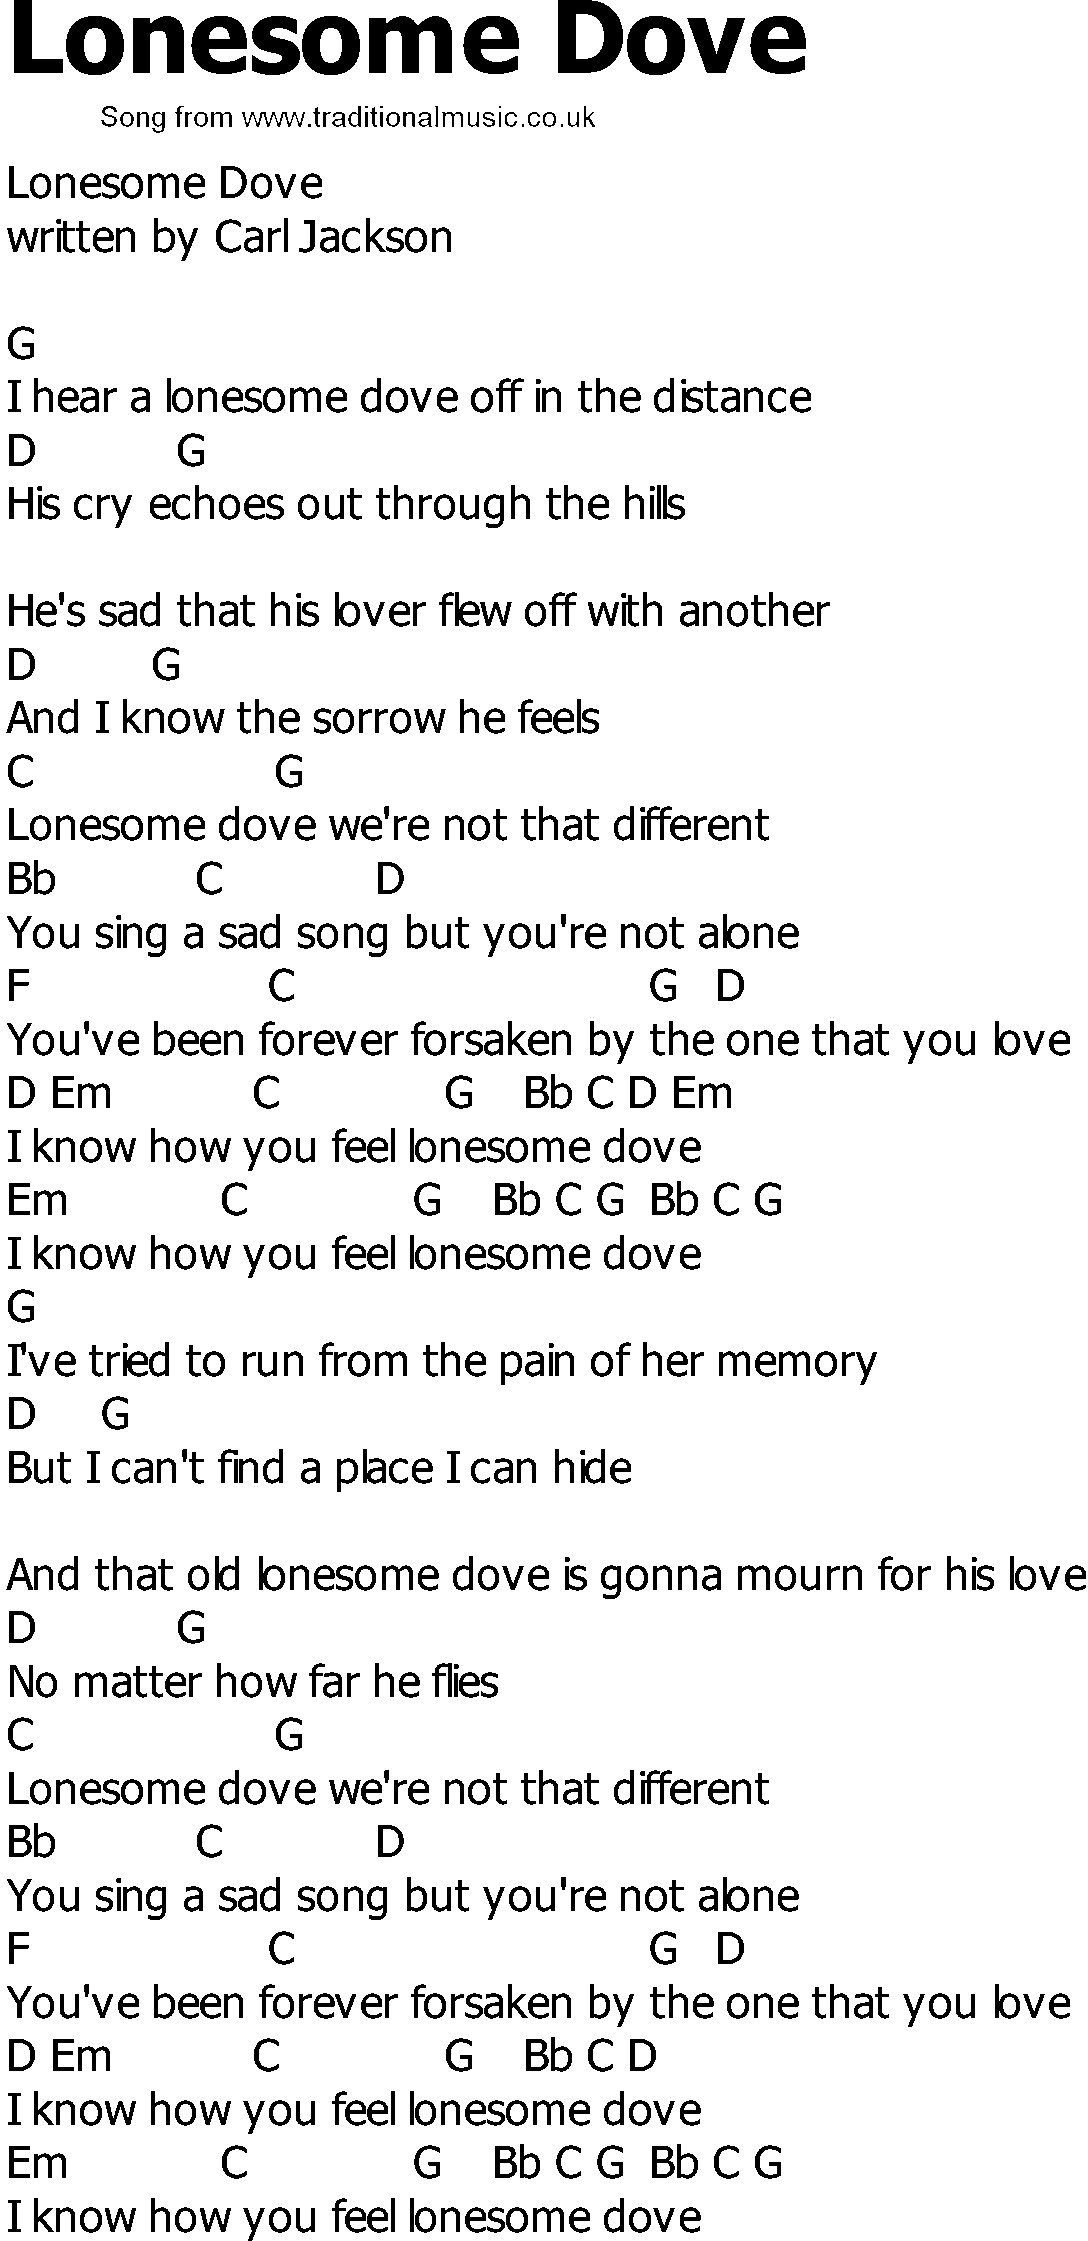 Old Country song lyrics with chords - Lonesome Dove